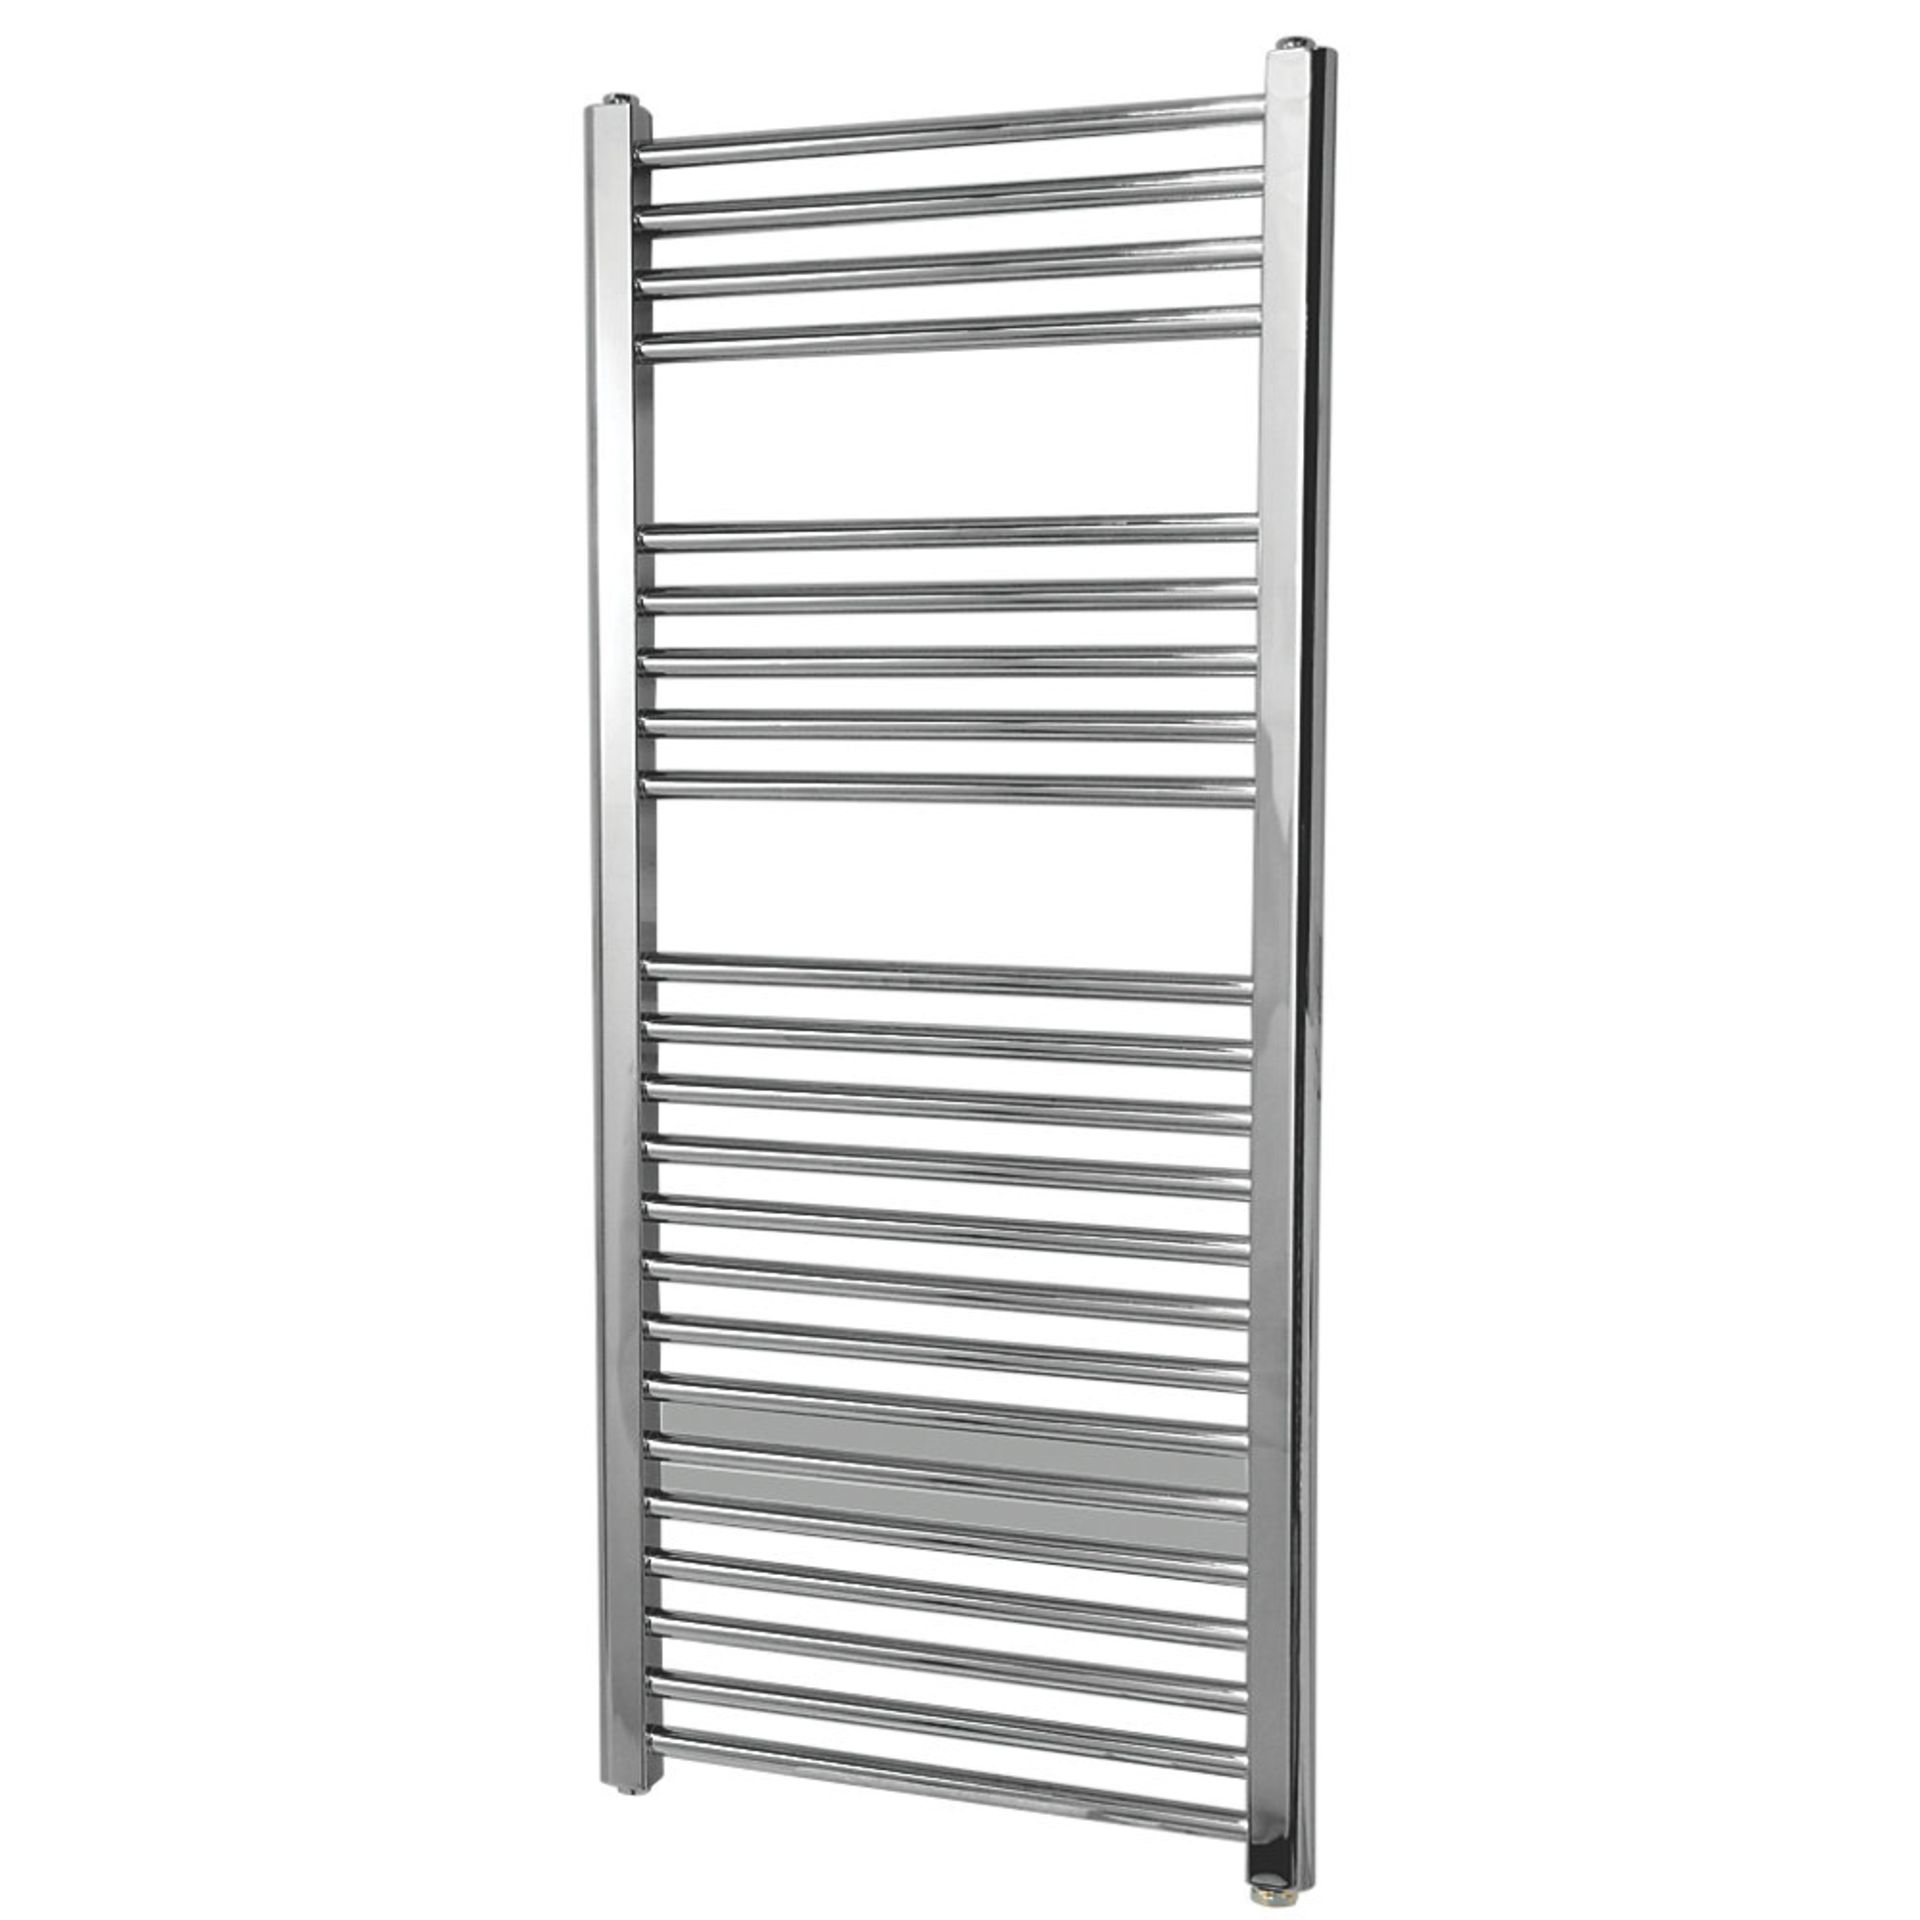 (CR17) 1200x600mm FLOMASTA FLAT ELECTRIC TOWEL RADIATOR CHROME. Electrical installation only. E... - Image 2 of 2